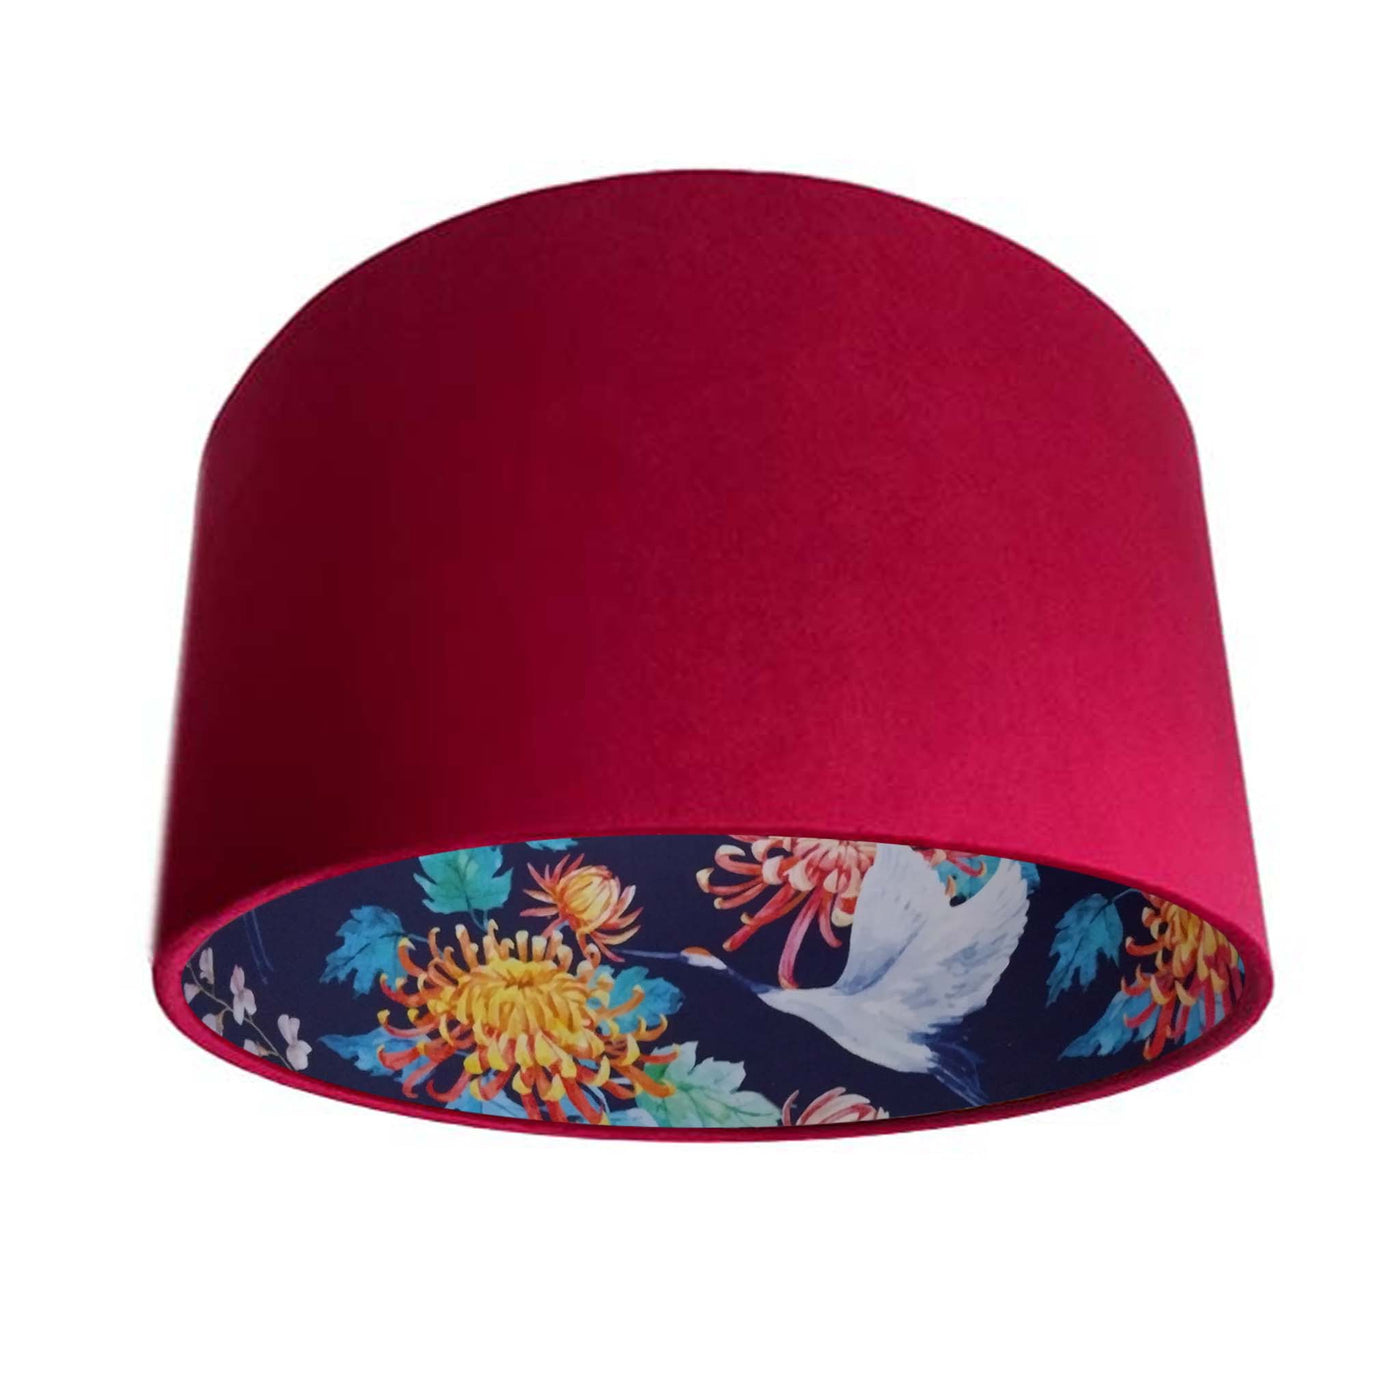 Japanese Cranes Lamp shade in Blue with Red Claret Velvet